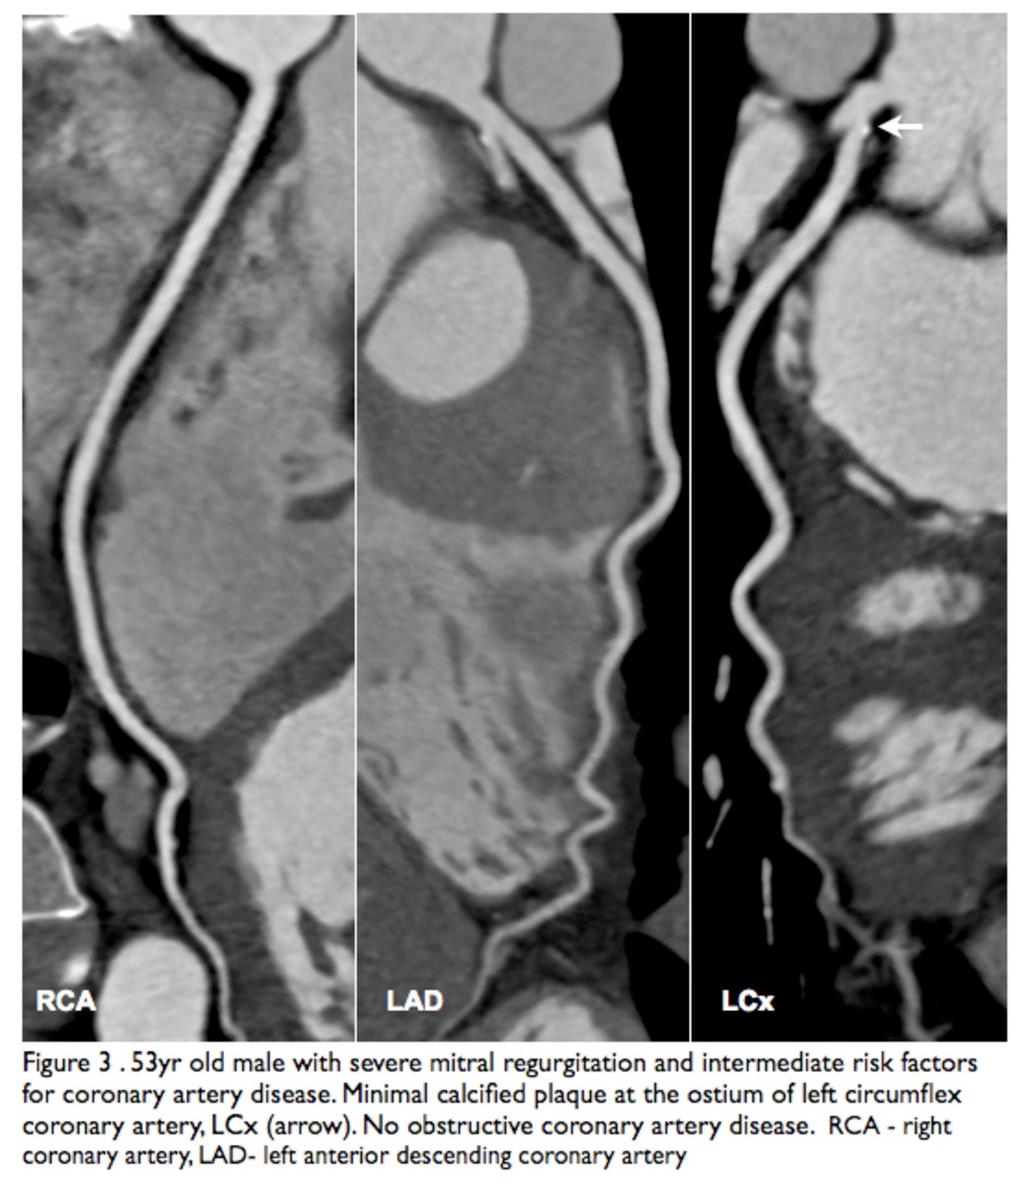 Fig. 2: Pre-operative CT technique, including retrospective ECG-gated CTA of the chest (blue horizontal lines), followed by contrast-enhanced CT of the abdomen and pelvis (yellow lines).